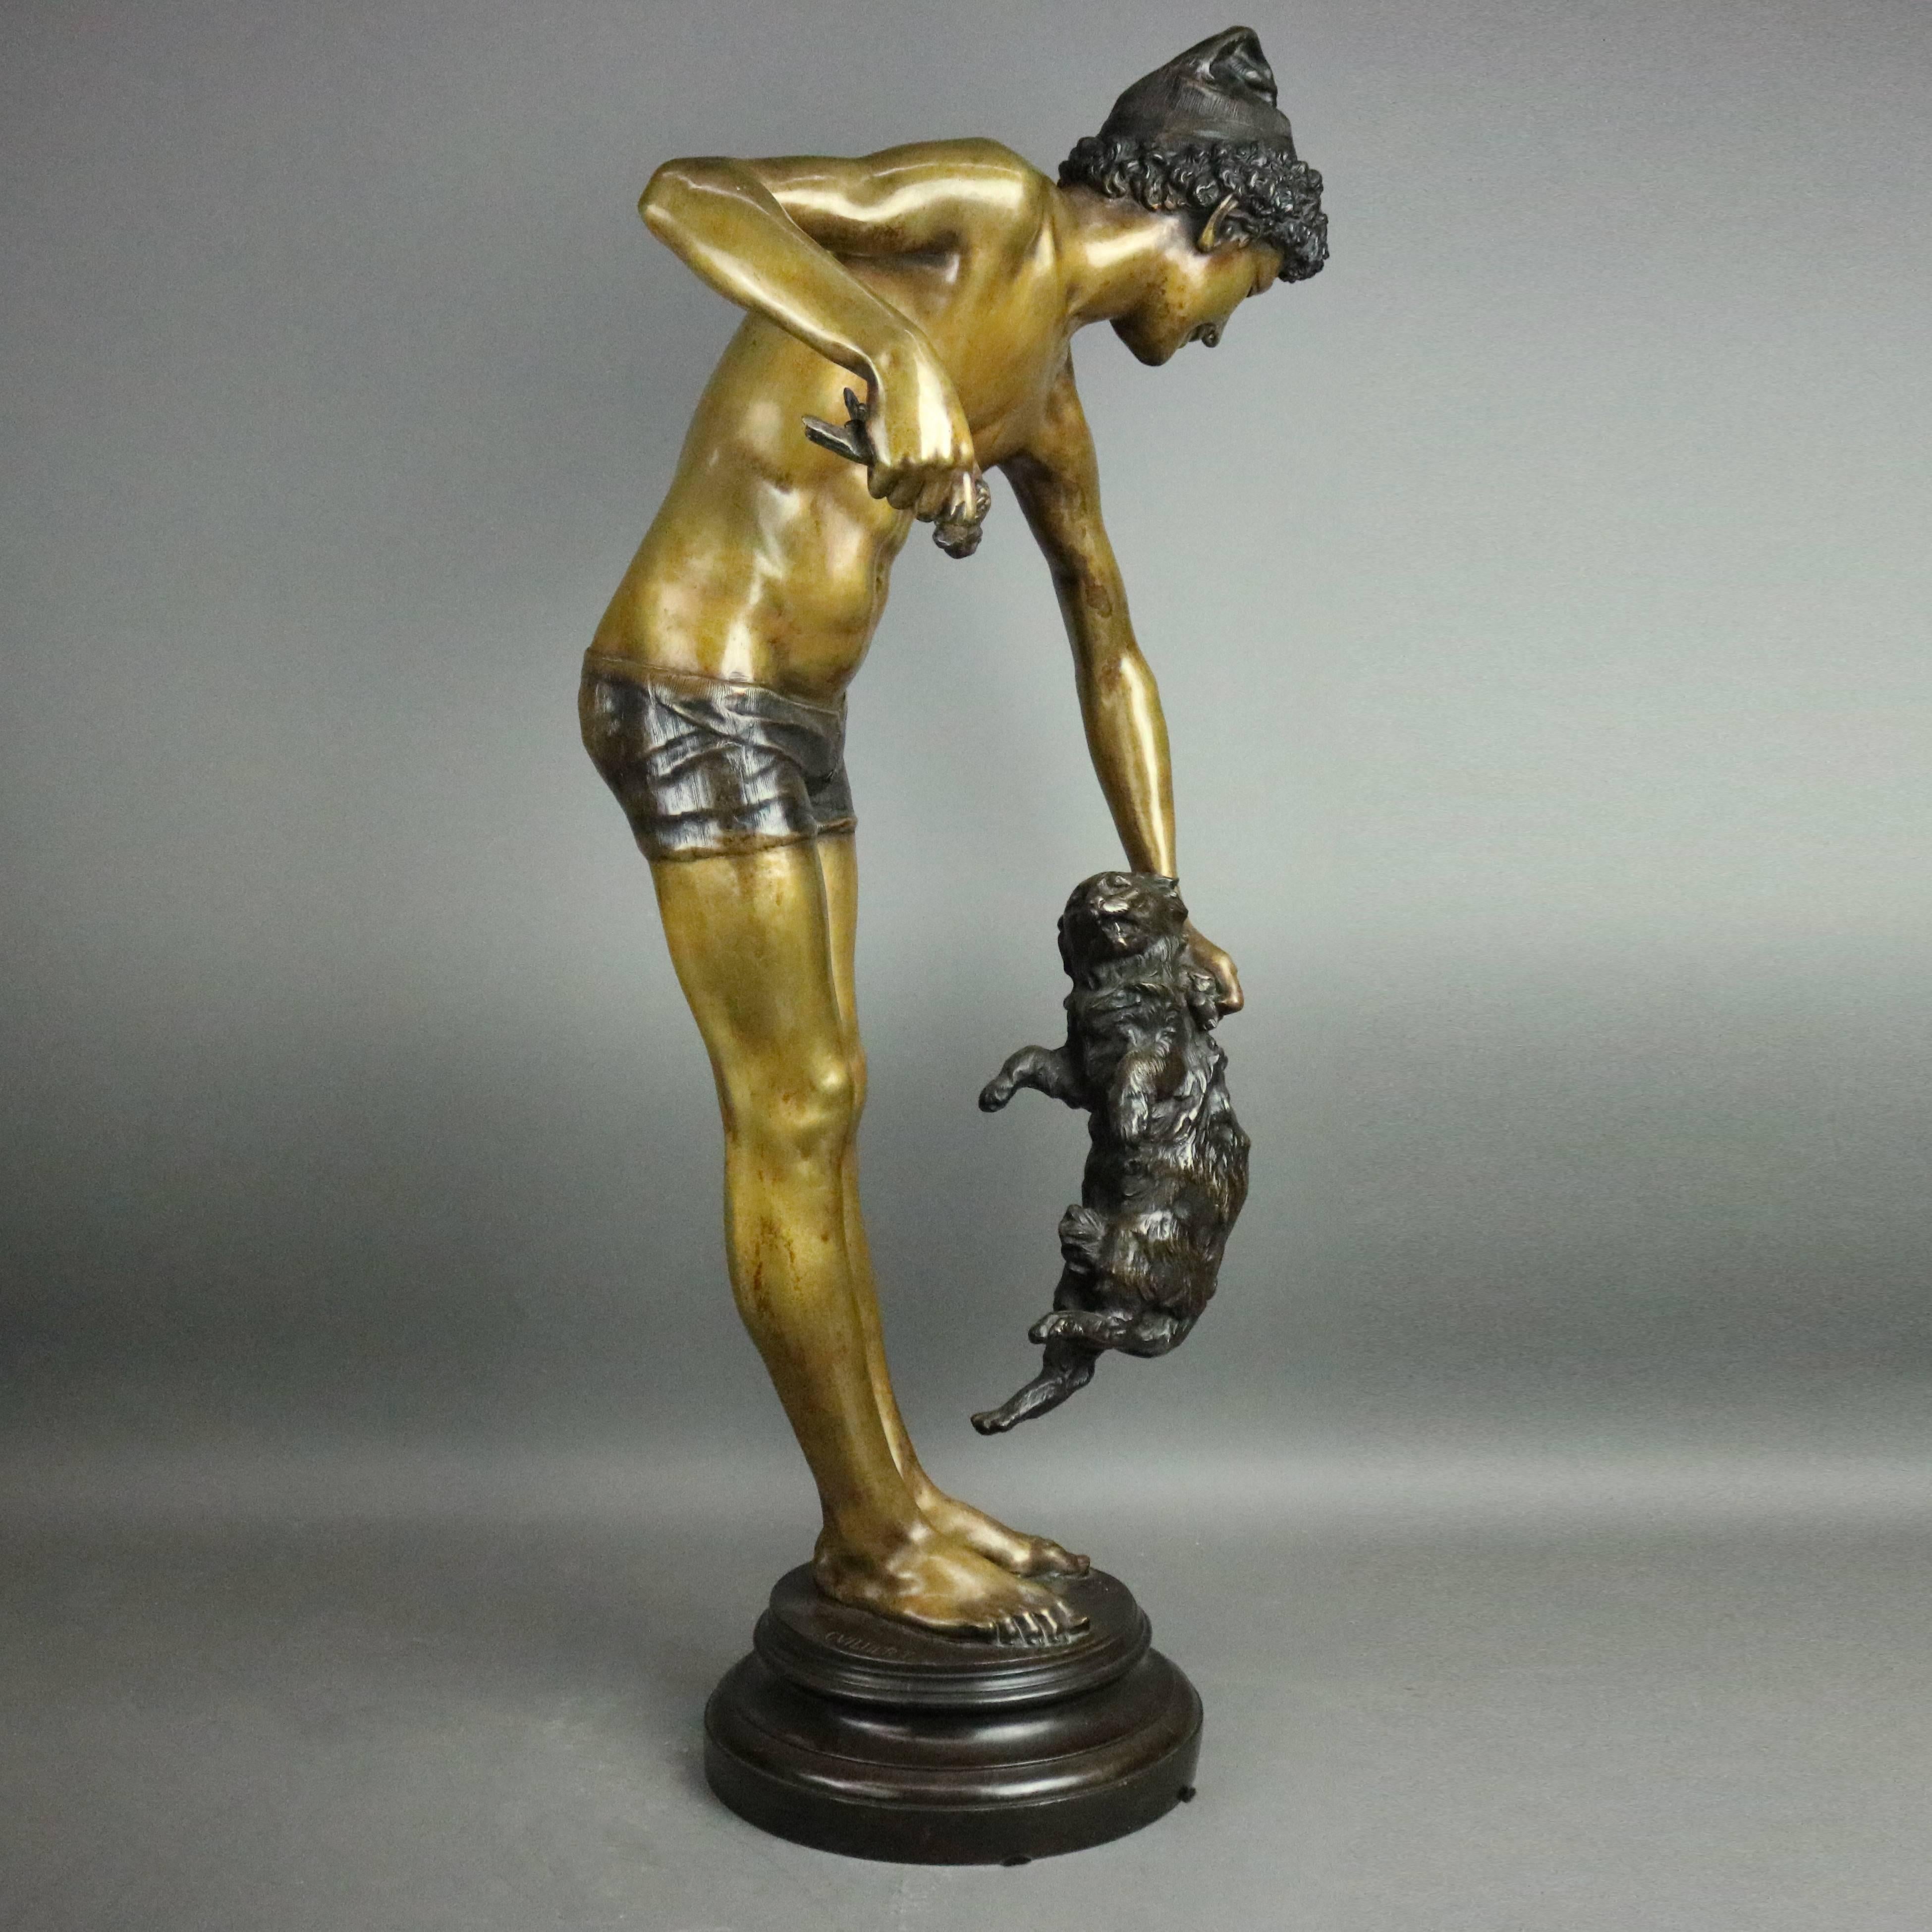 Monumental antique bronze figural sculpture "Separating the Foes", after Earnest Charles Guilbert, depicts young man separating a cat from his caught bird, signed on base E. Guilbert, circa 1880

Measures: 31" H x 14" W x